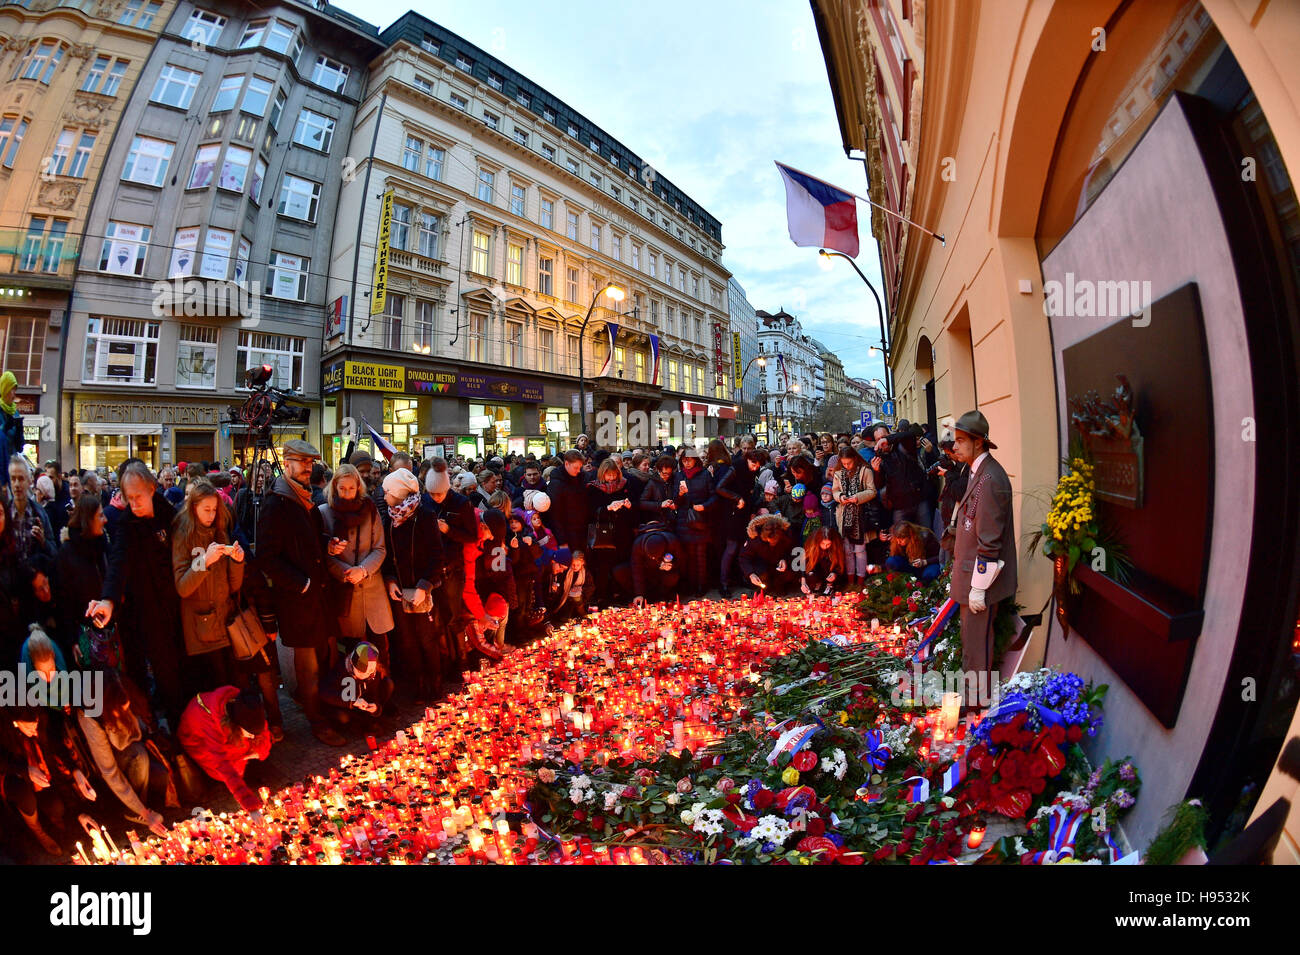 Thousands of people light candles as they pay respect to the 1989 events that lead to fall of communism in front of the memorial plaque marking the November 17, 1989 events on Narodni street in Prague, Czech Republic, on Thursday, November 17, 2016. The Day of Struggle for Freedom and Democracy on November 17 commemorates student demonstrations after the Nazi occupation in 1939 and against the Communist regime in 1989. Communist police cordoned off a student protest march in the Prague centre on November 17, 1989 and then brutally beat up its participants. The police violence triggered the eve Stock Photo